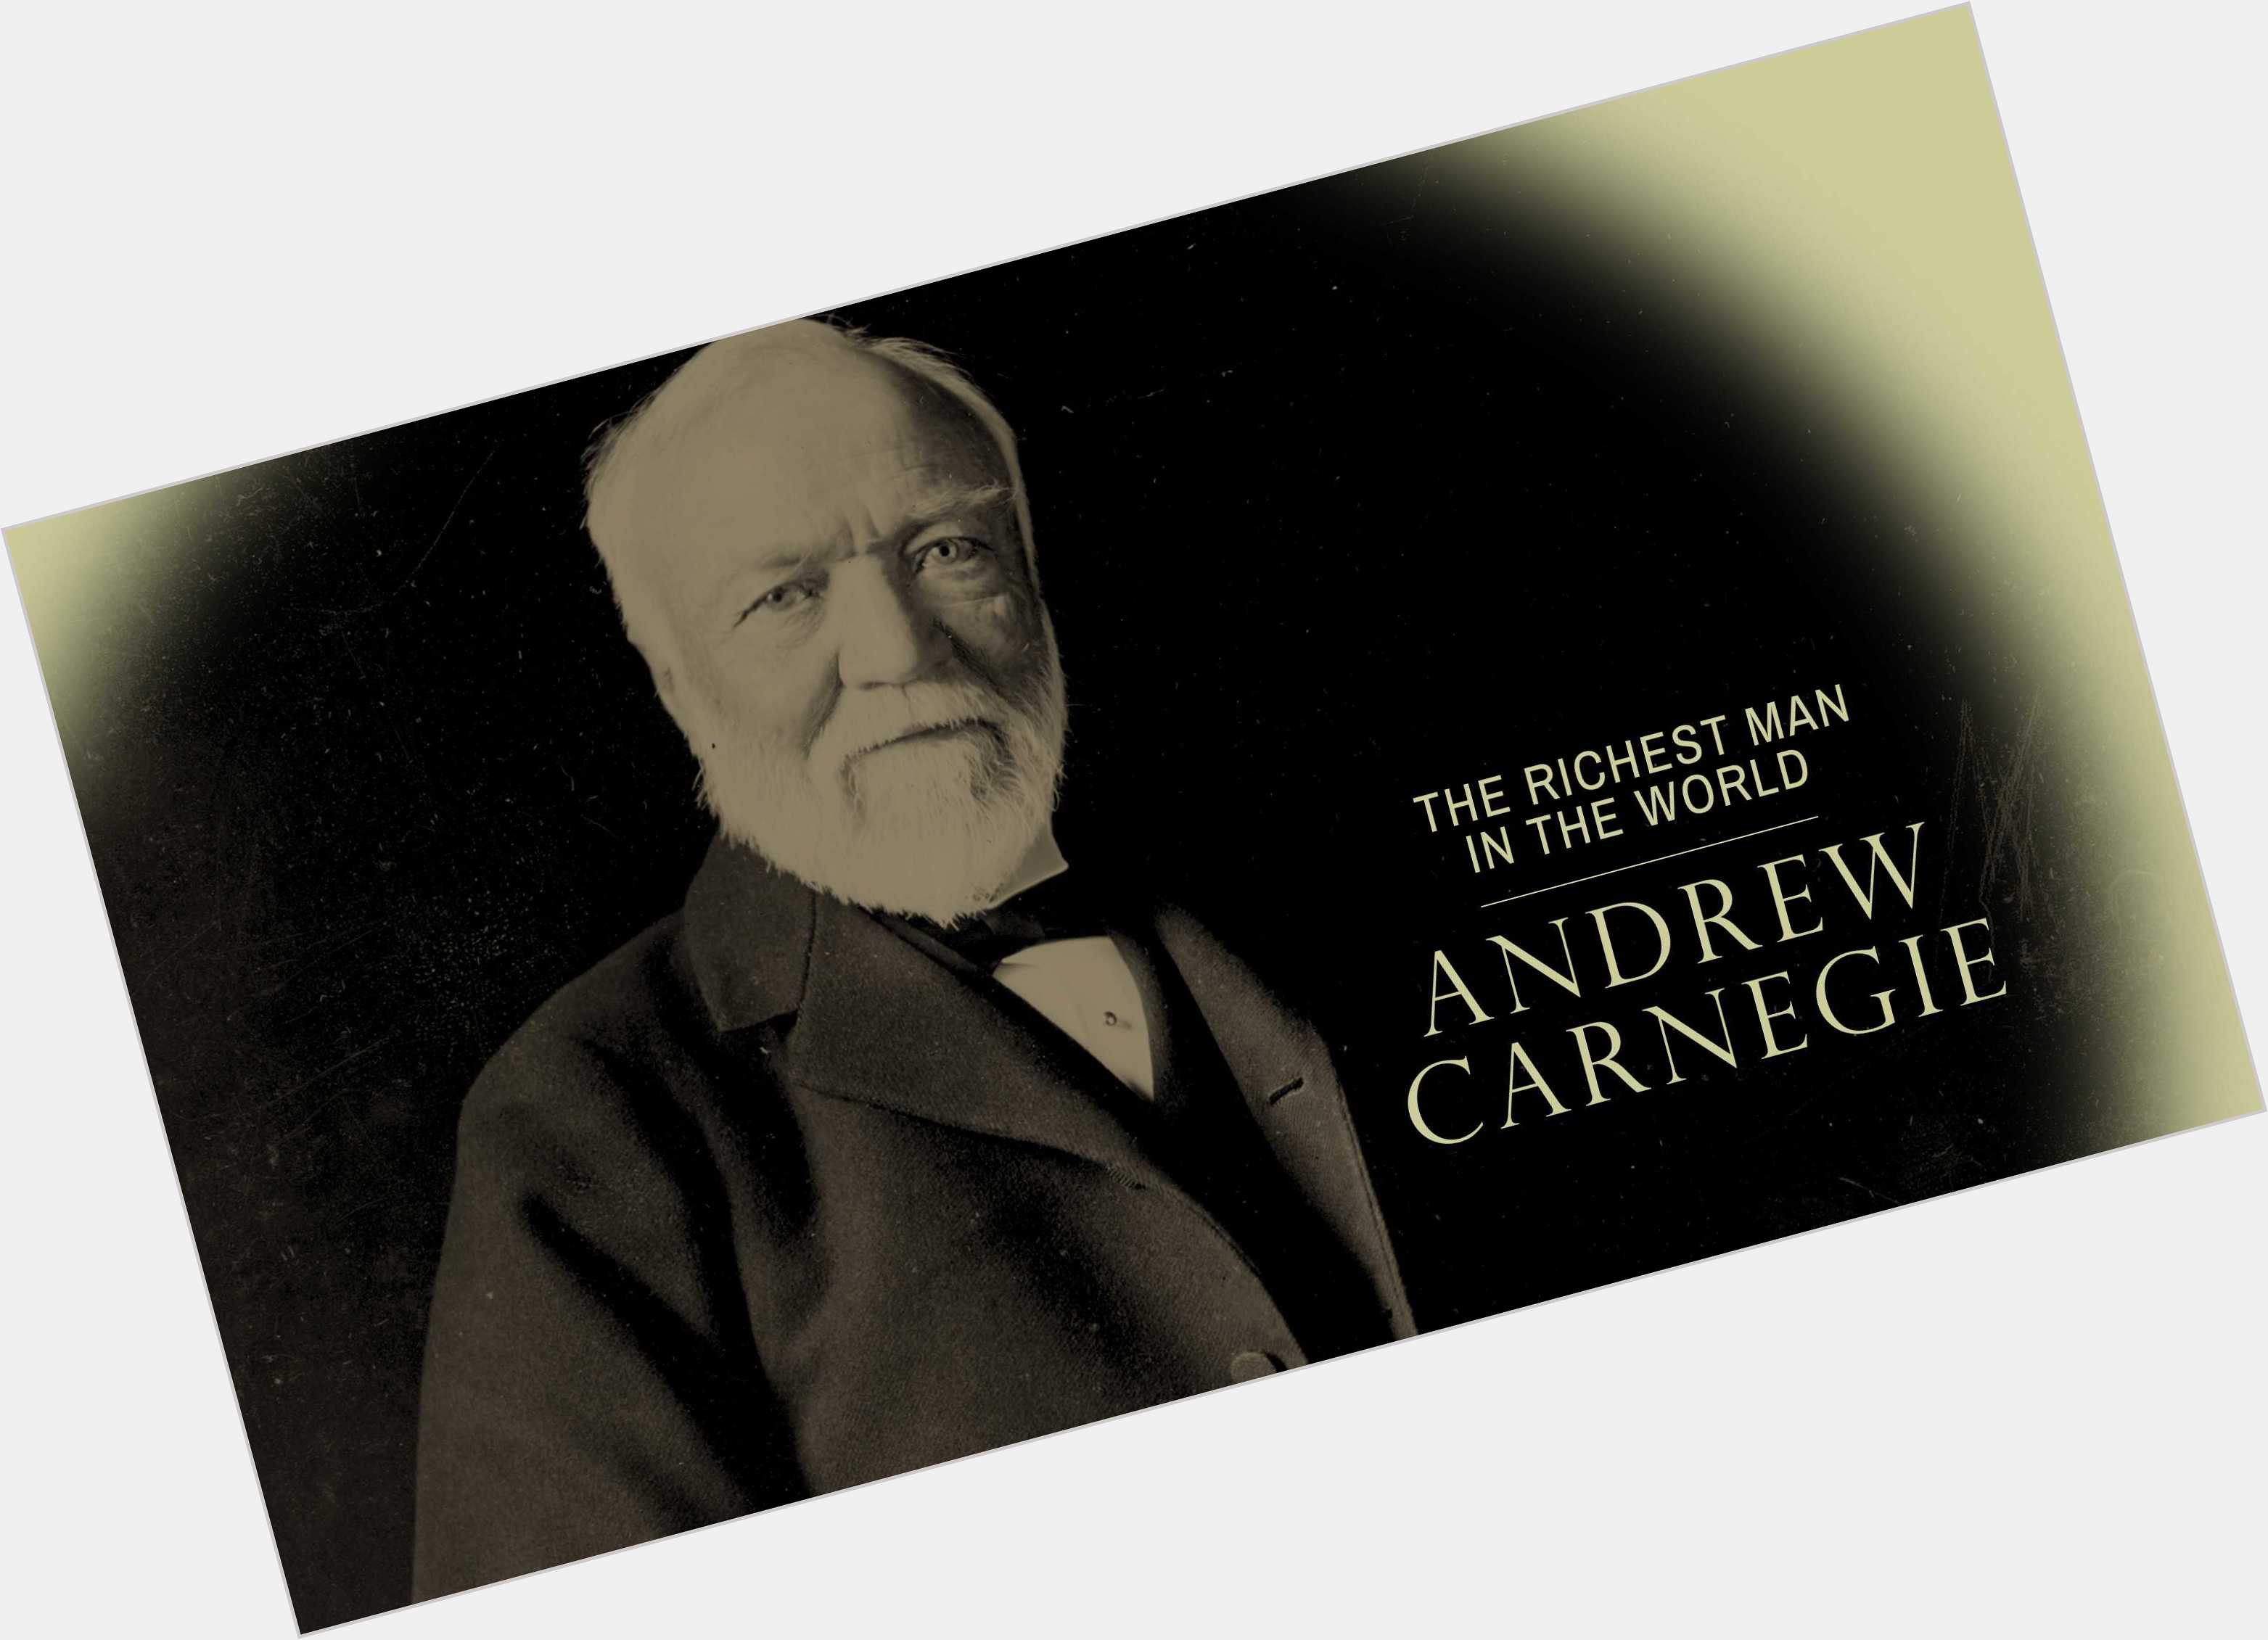 <a href="/hot-men/andrew-carnegie/where-dating-news-photos">Andrew Carnegie</a>  